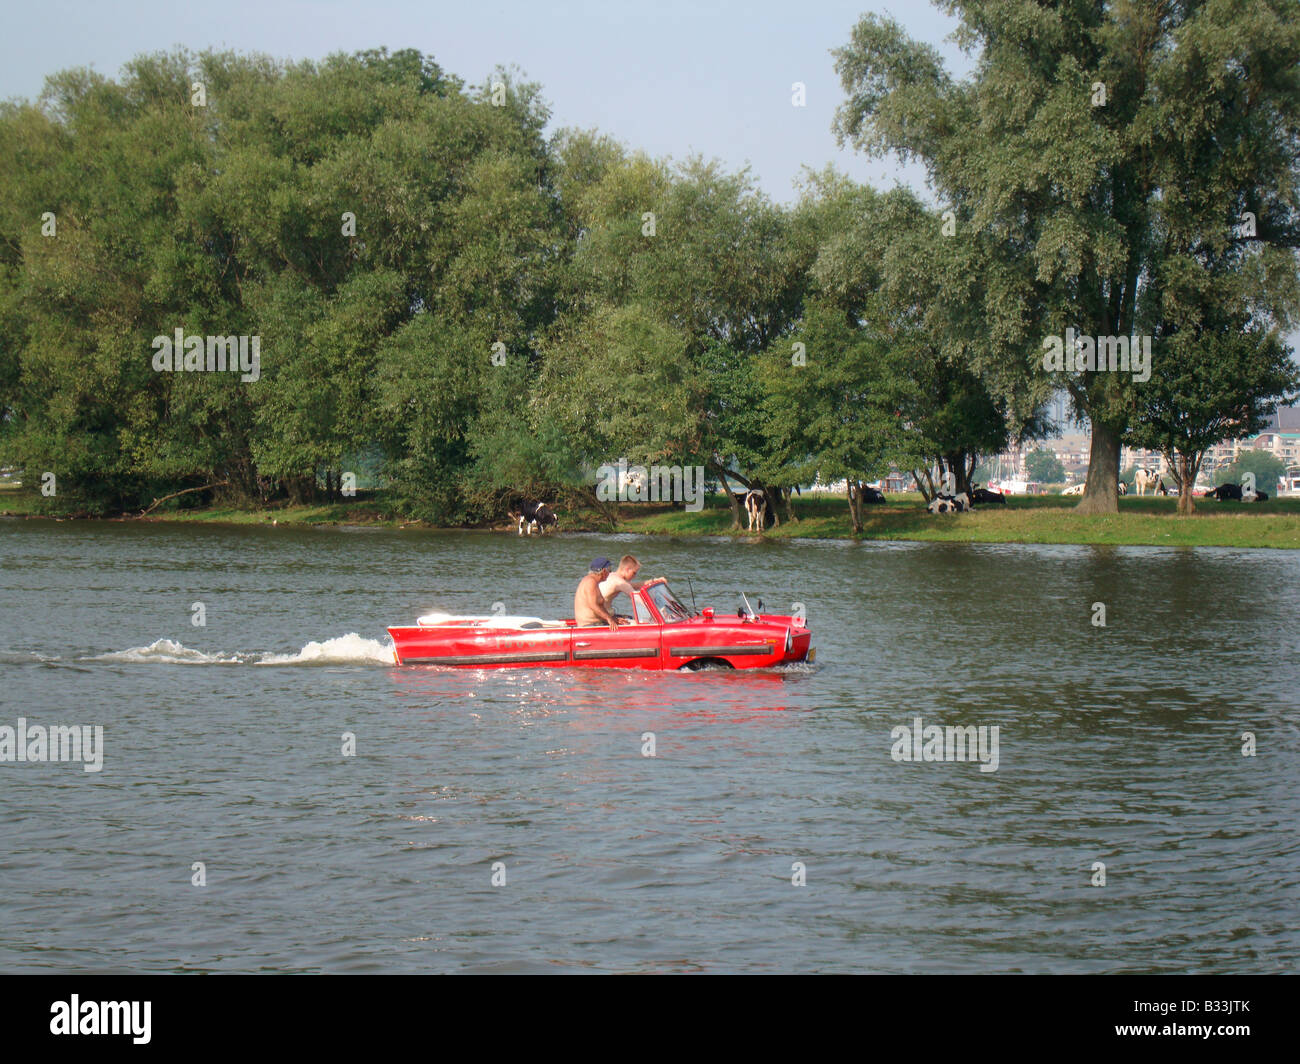 Amphicar in the water Stock Photo